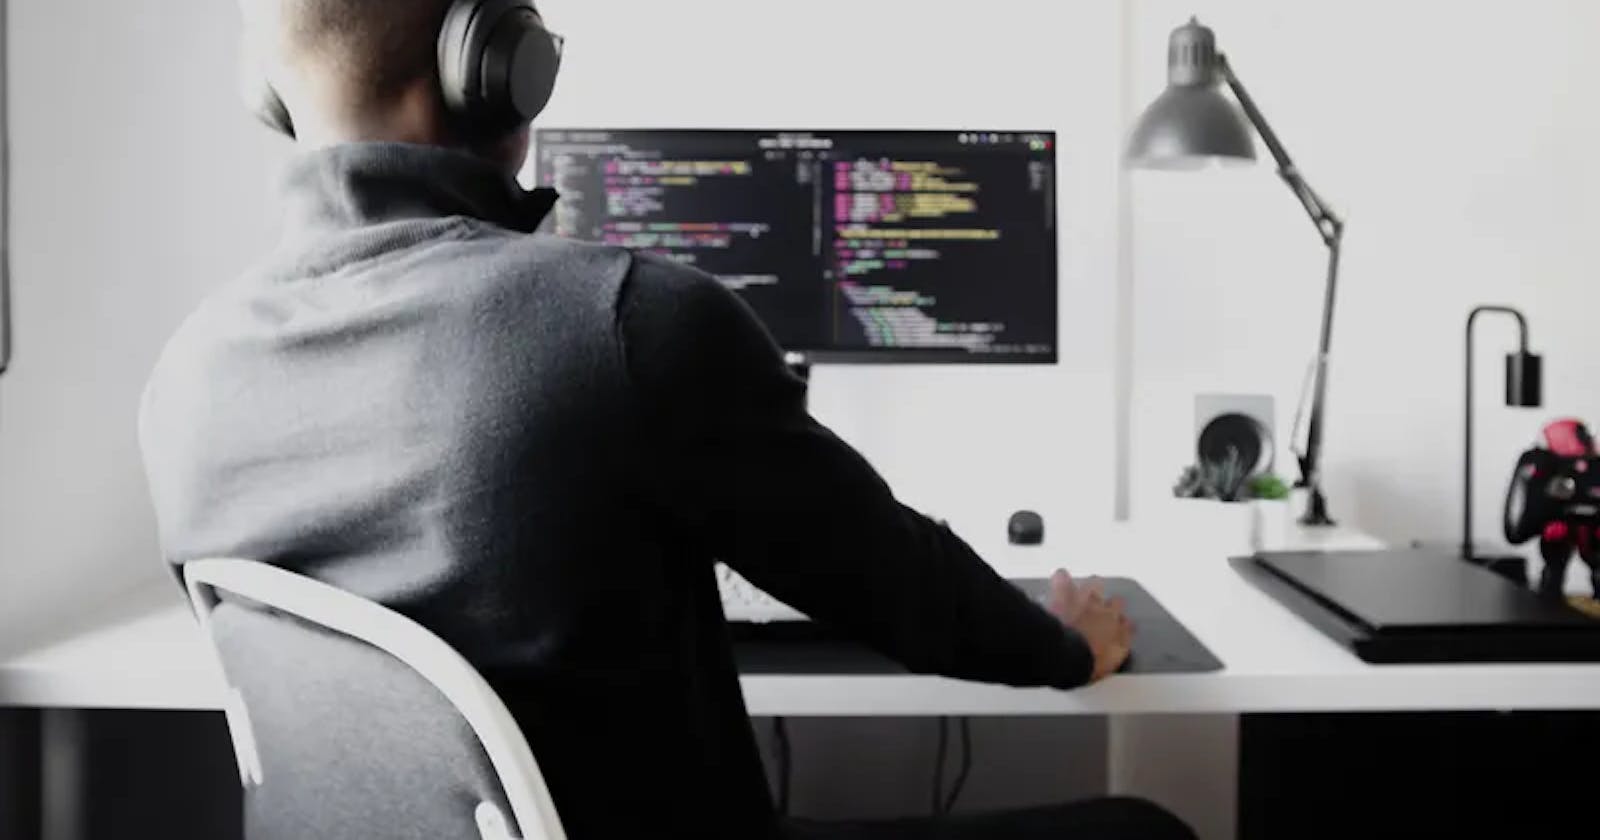 Are You a DevOps Engineer If You Aren't Writing Code?